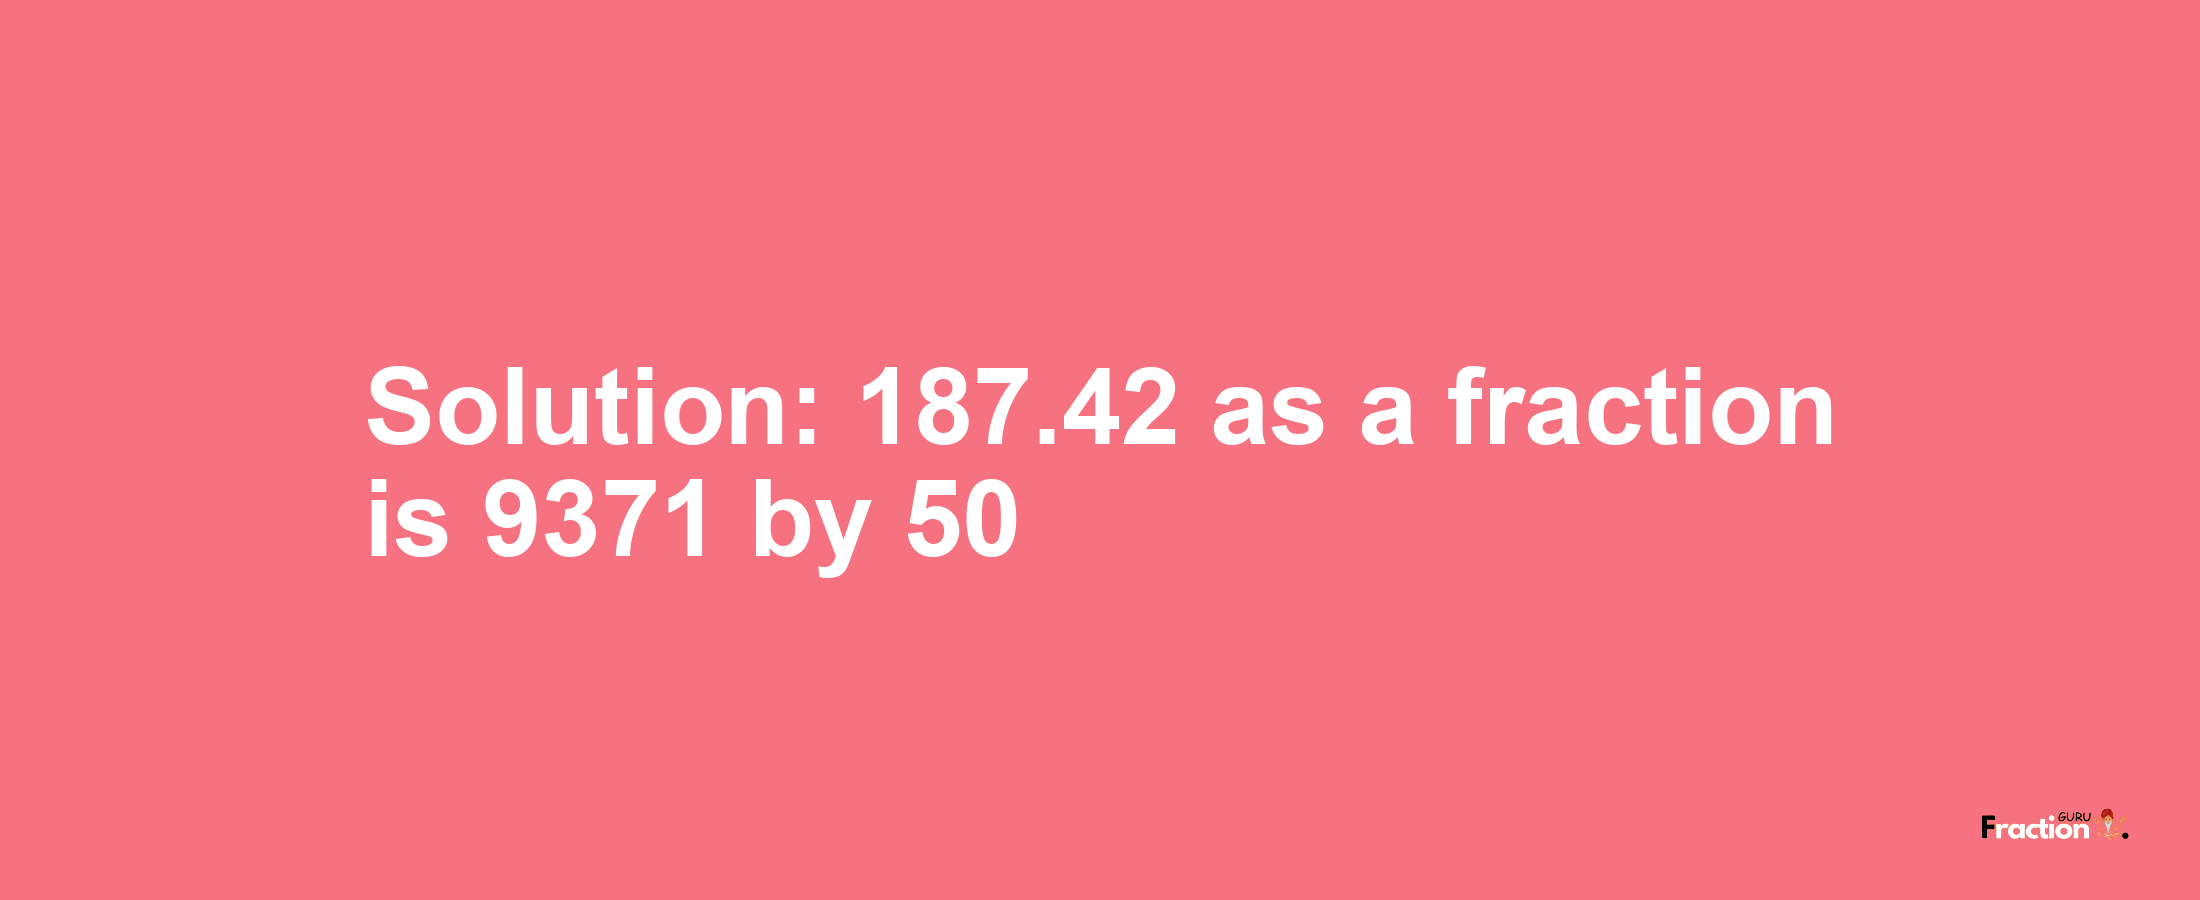 Solution:187.42 as a fraction is 9371/50